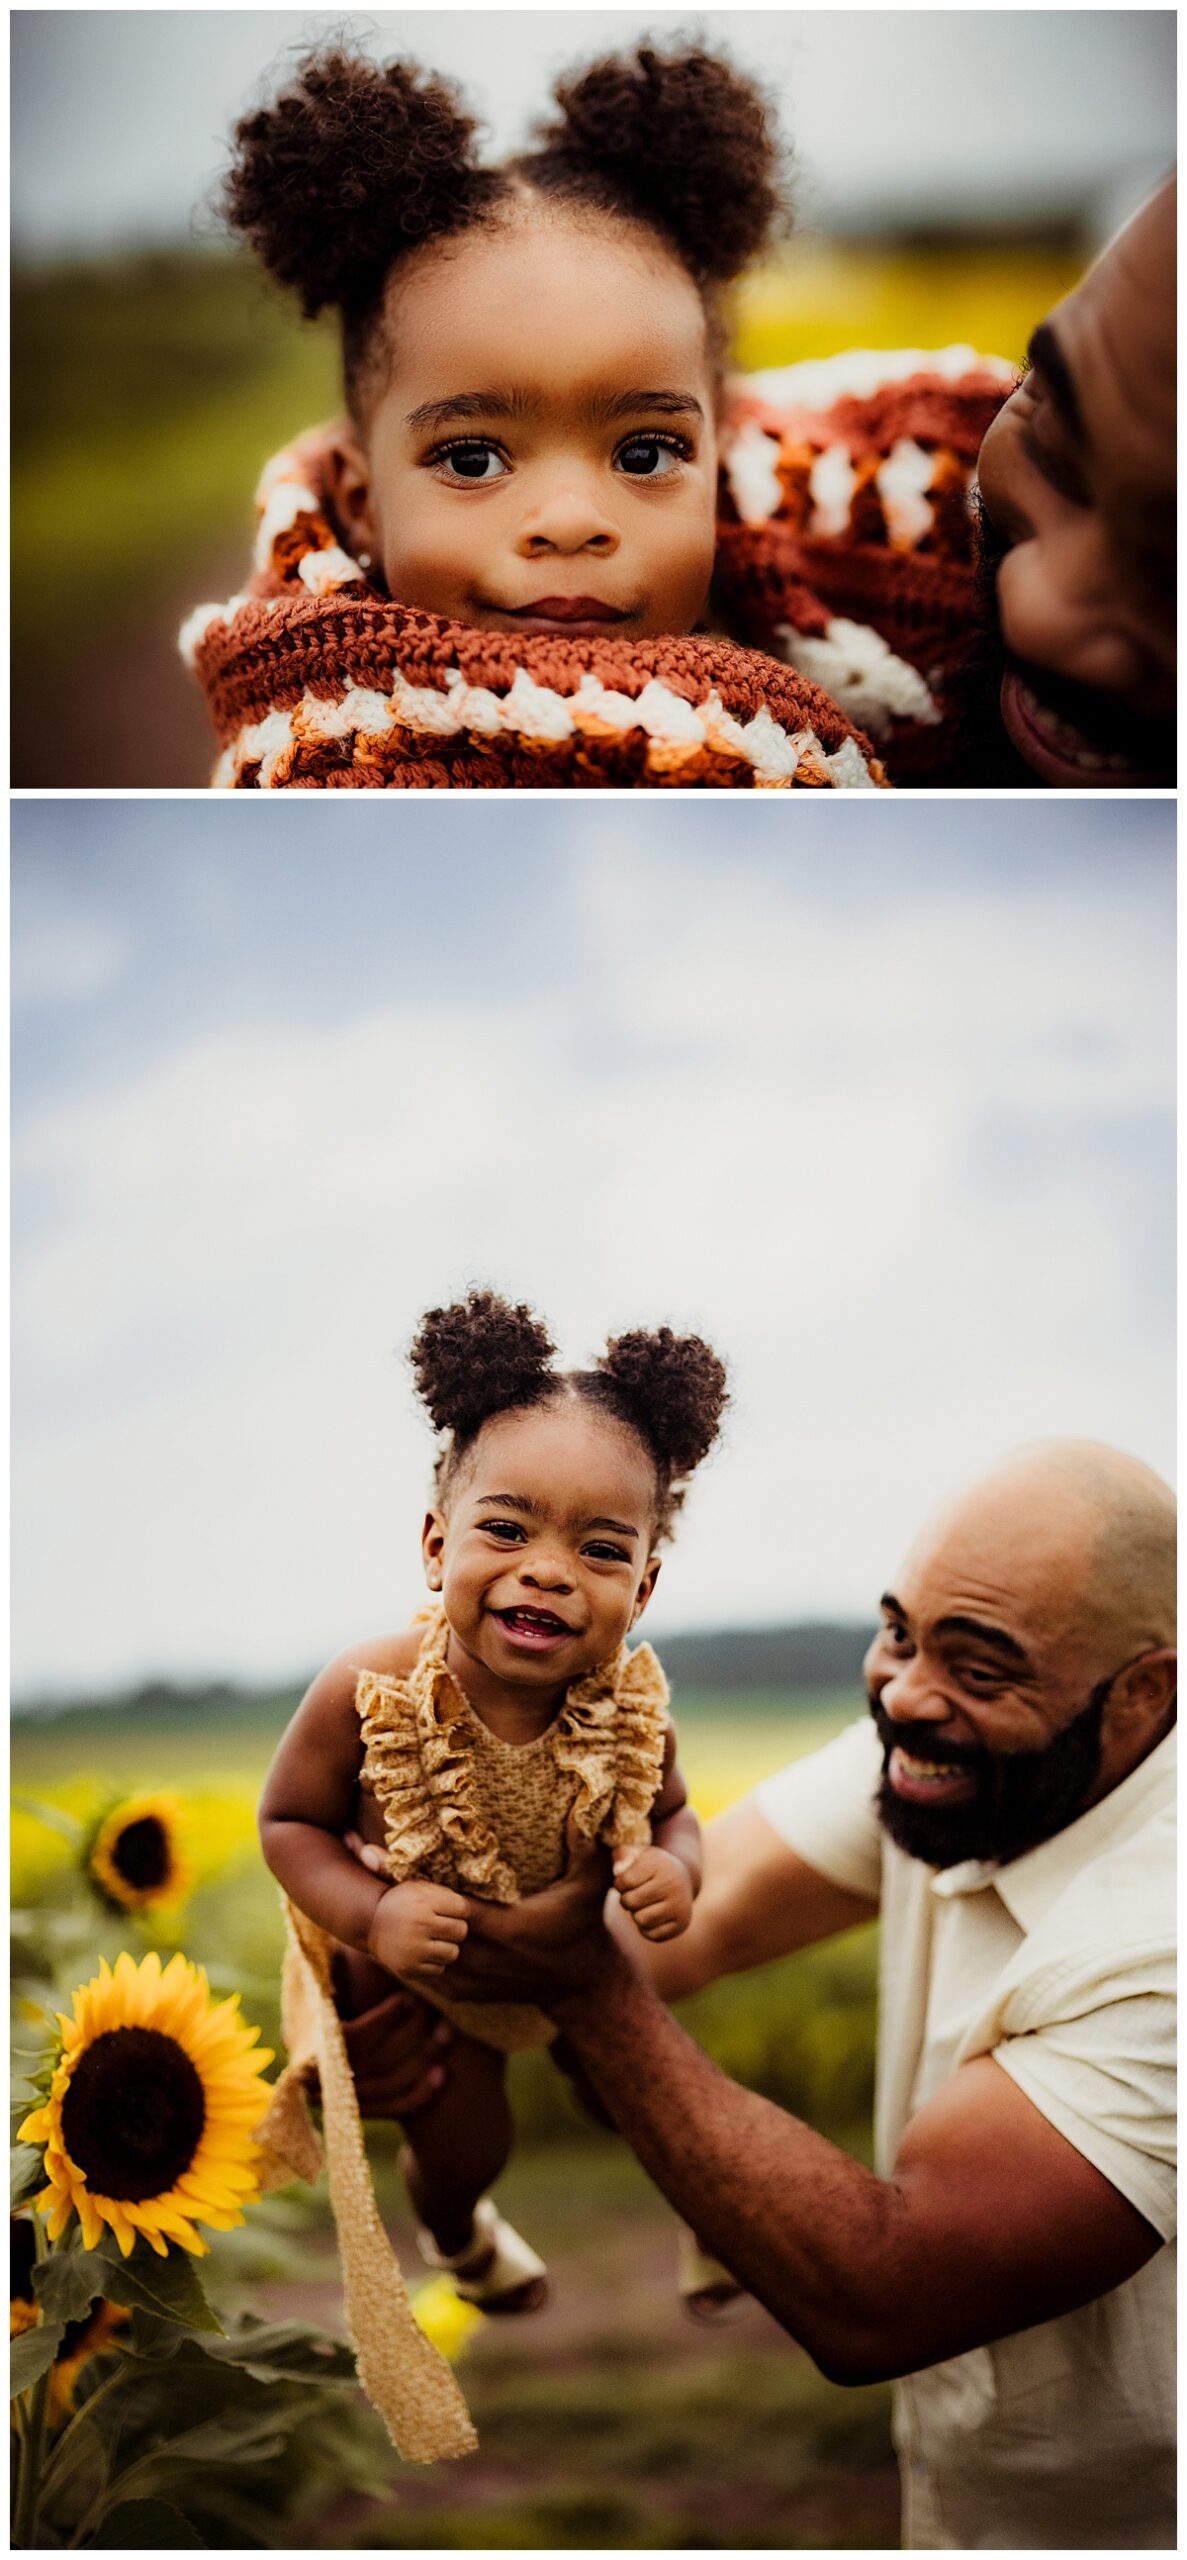 Dad and daughter play together during their sunflower photoshoot